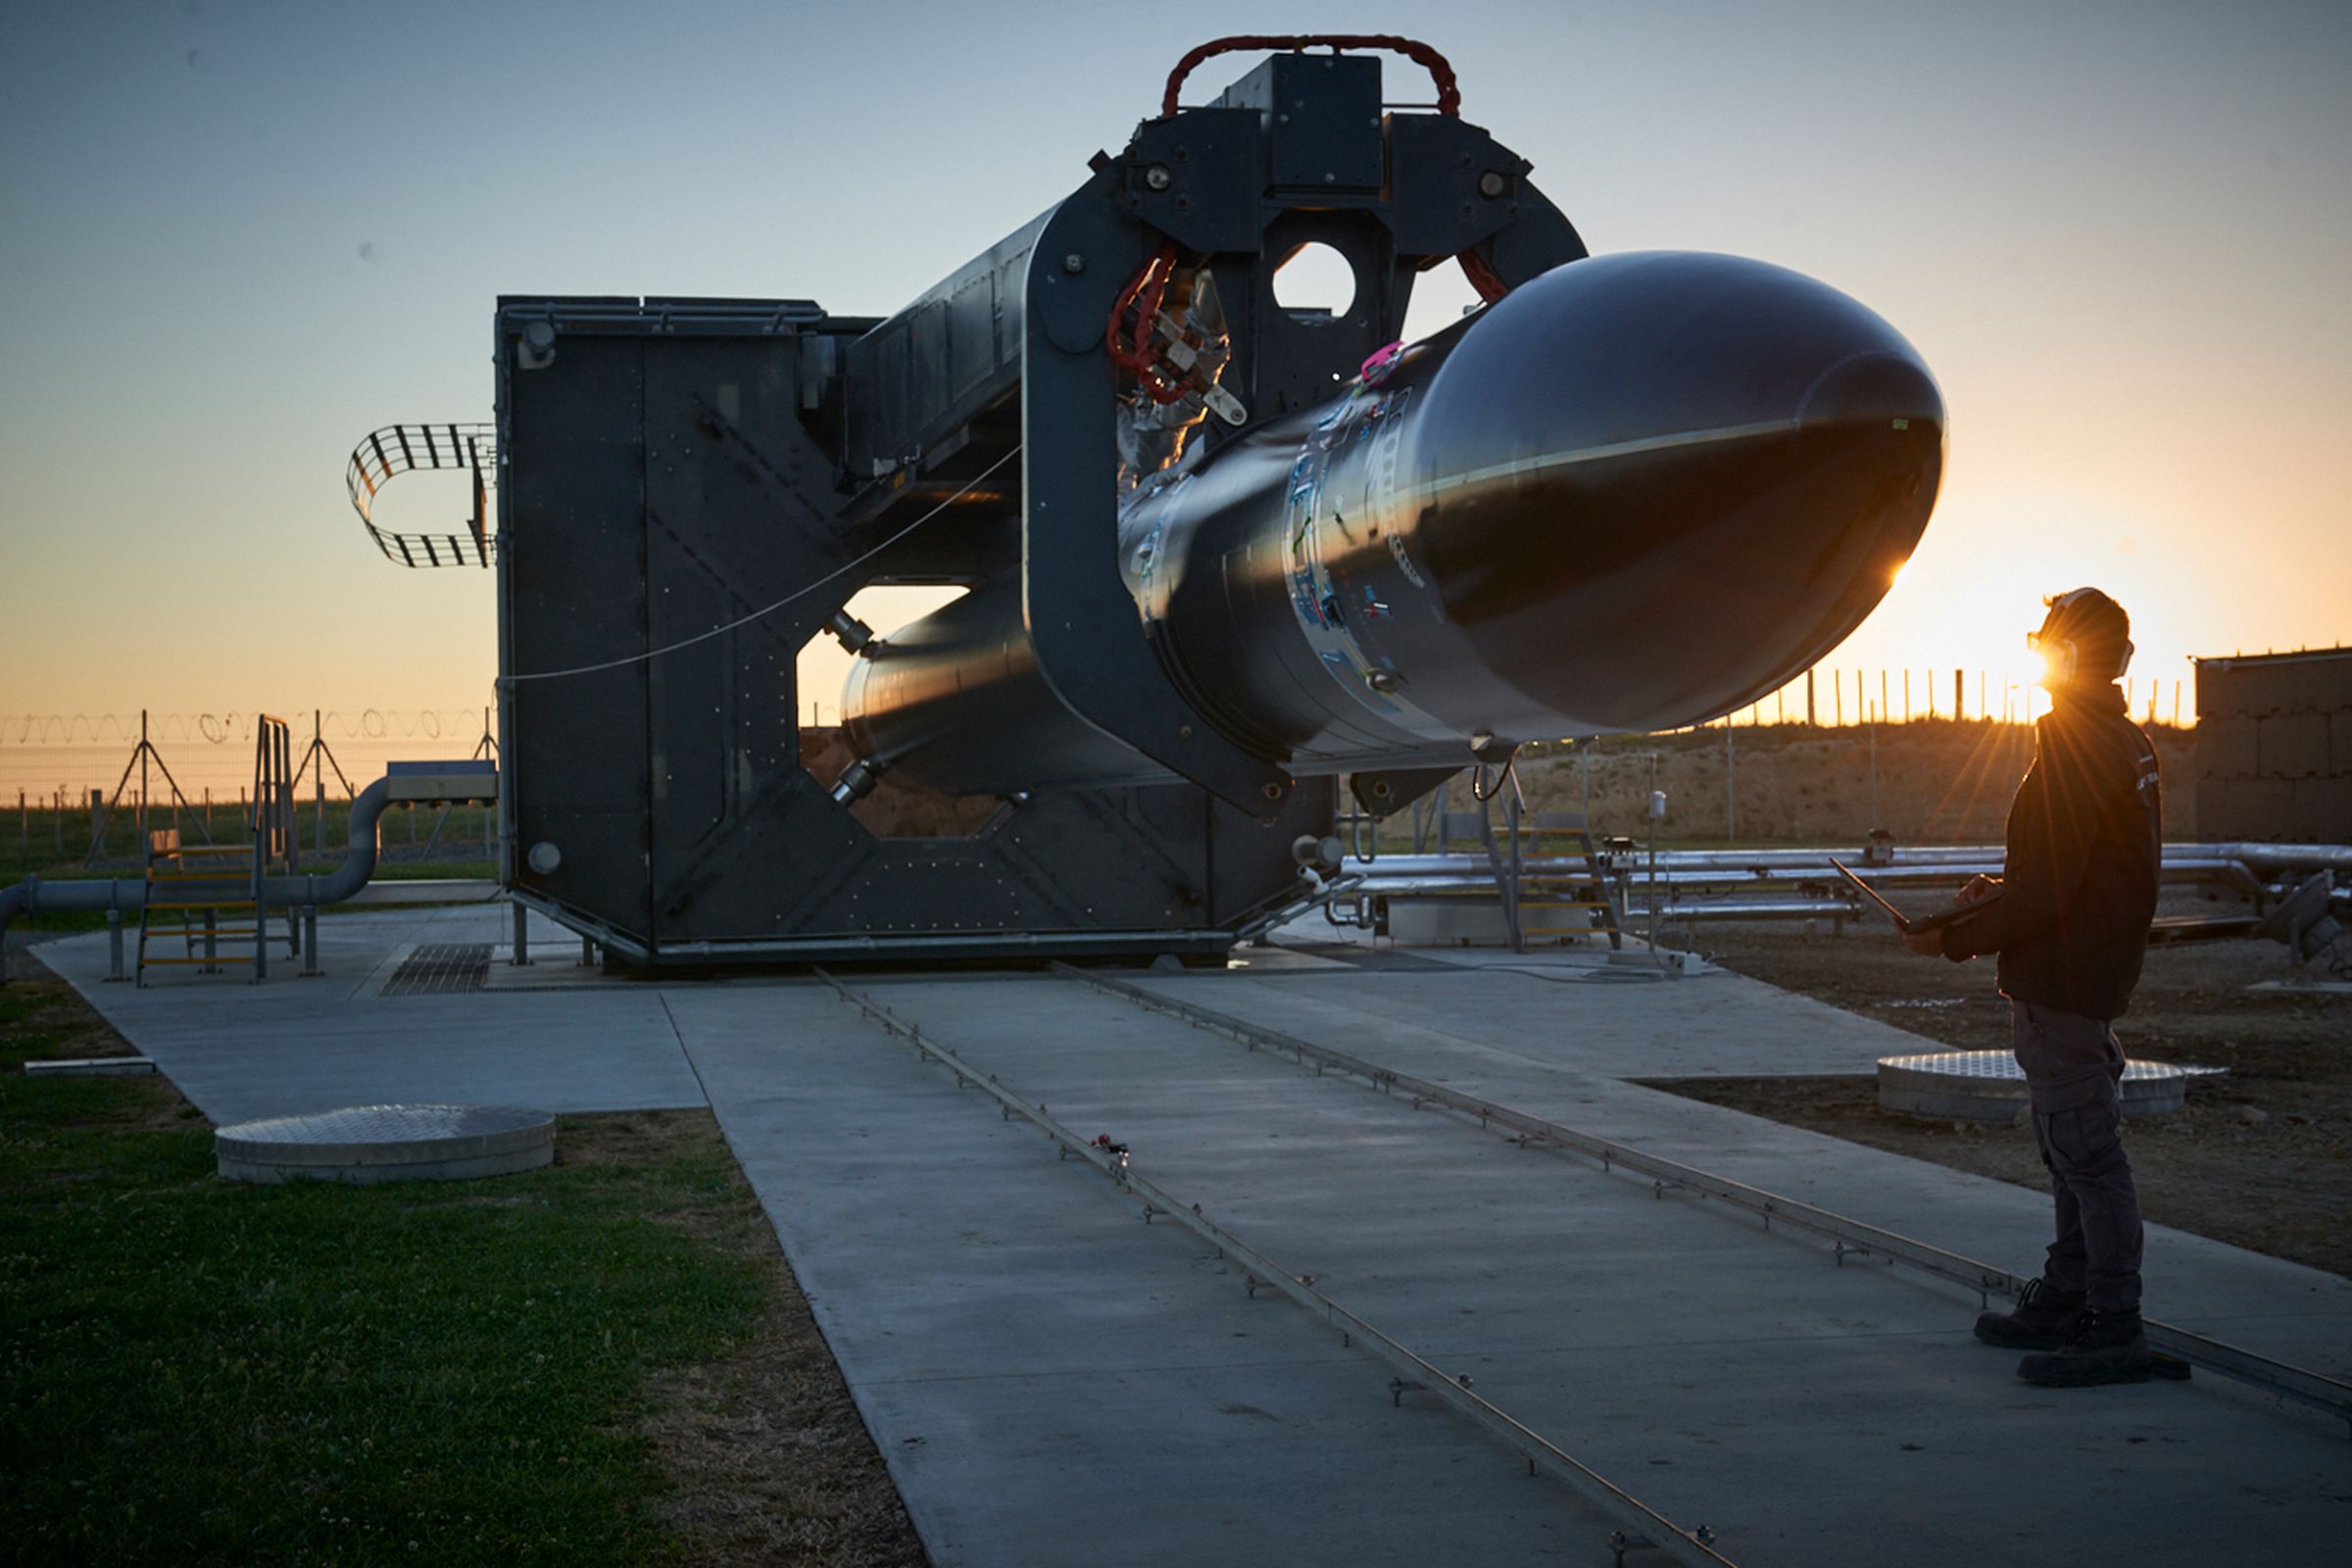 Rocket Lab’s Electron rocket, to be used for the upcoming flight “Still Testing.”